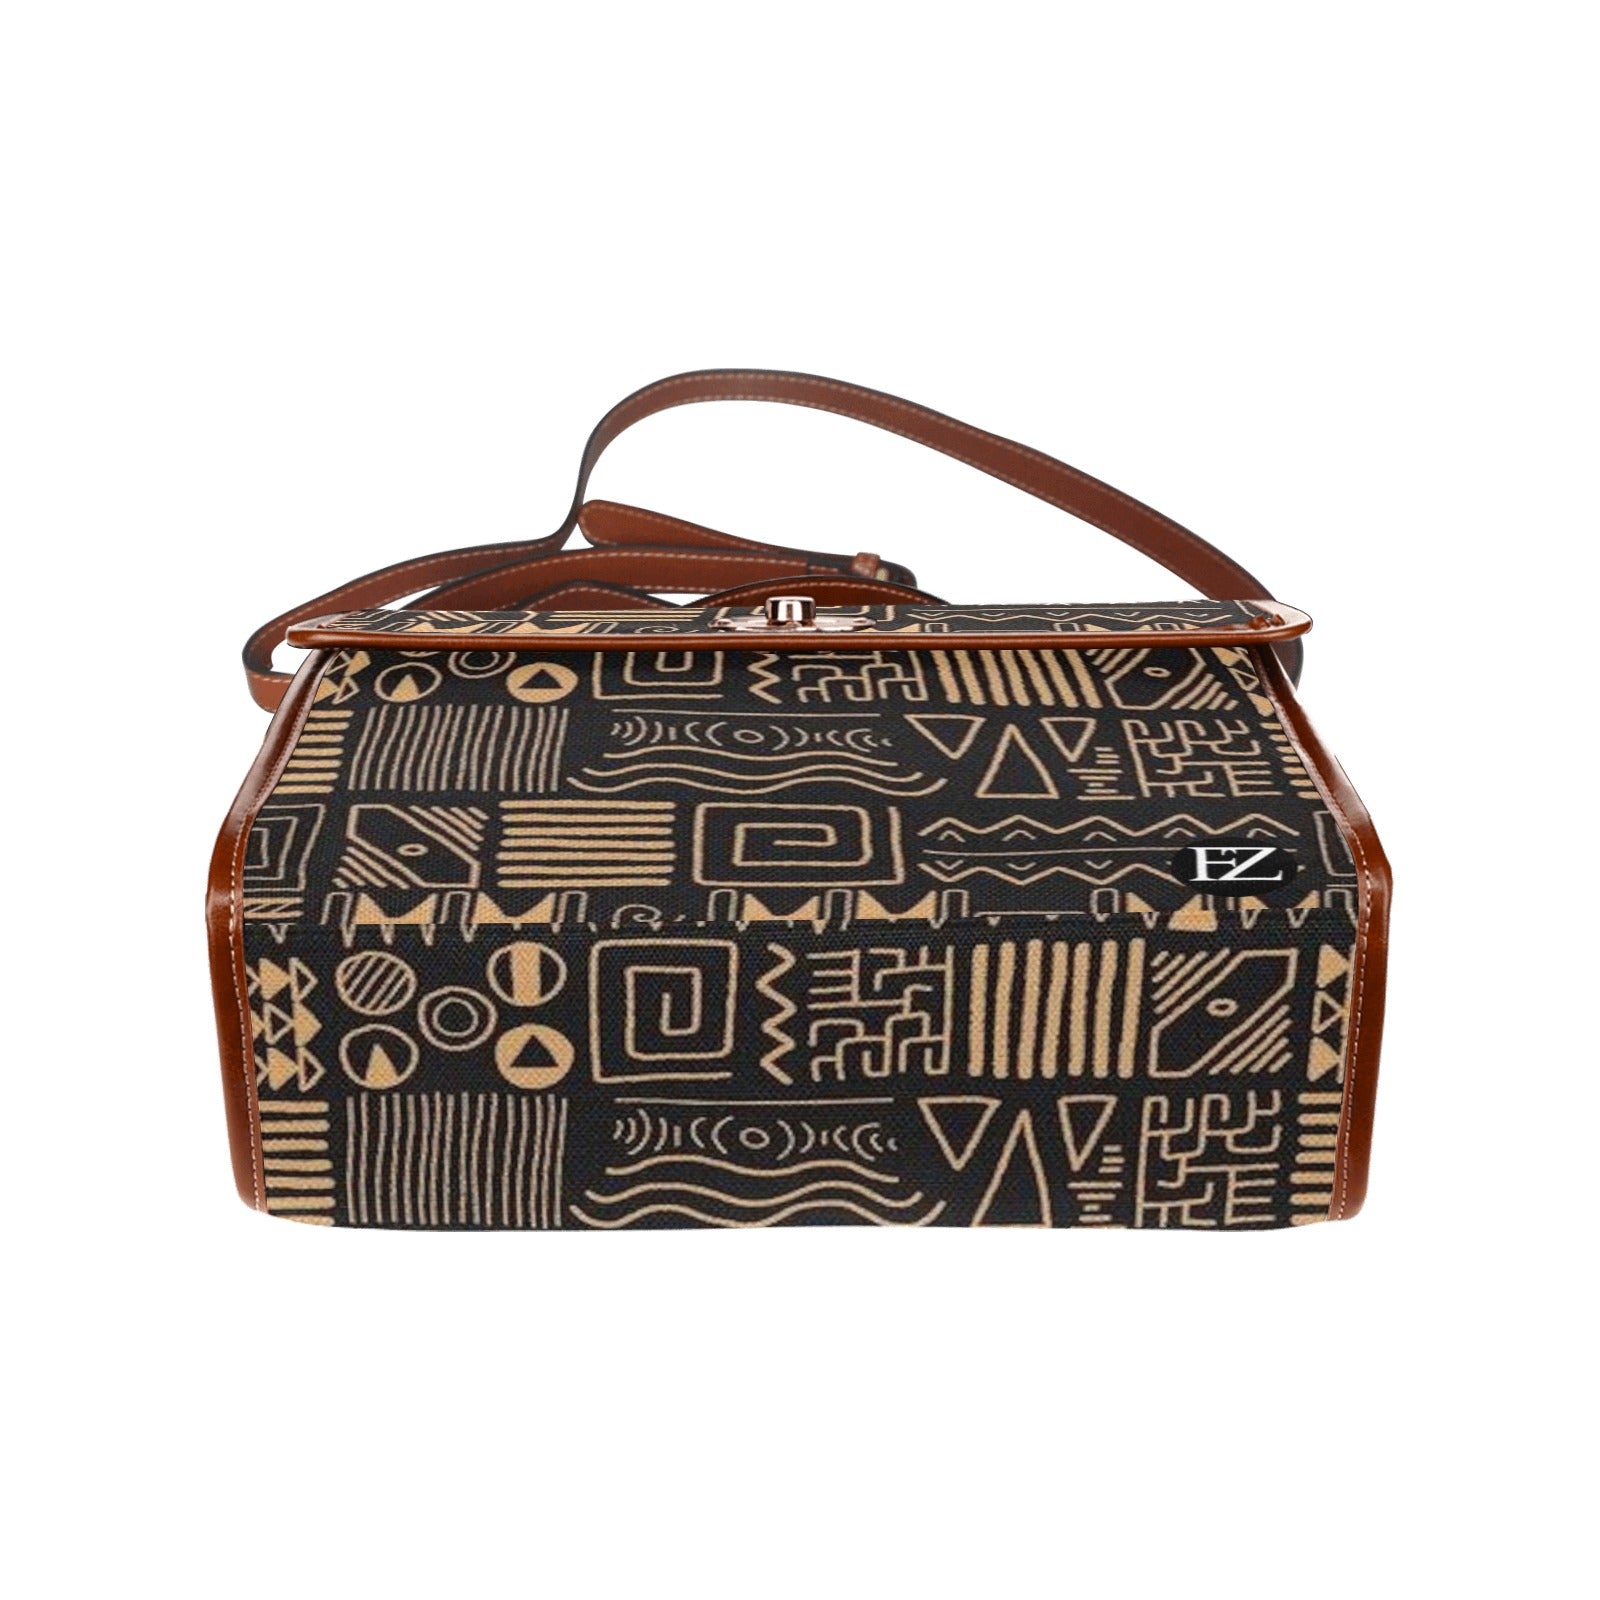 fz egypt hand bag all over print waterproof canvas bag(model1641)(brown strap)